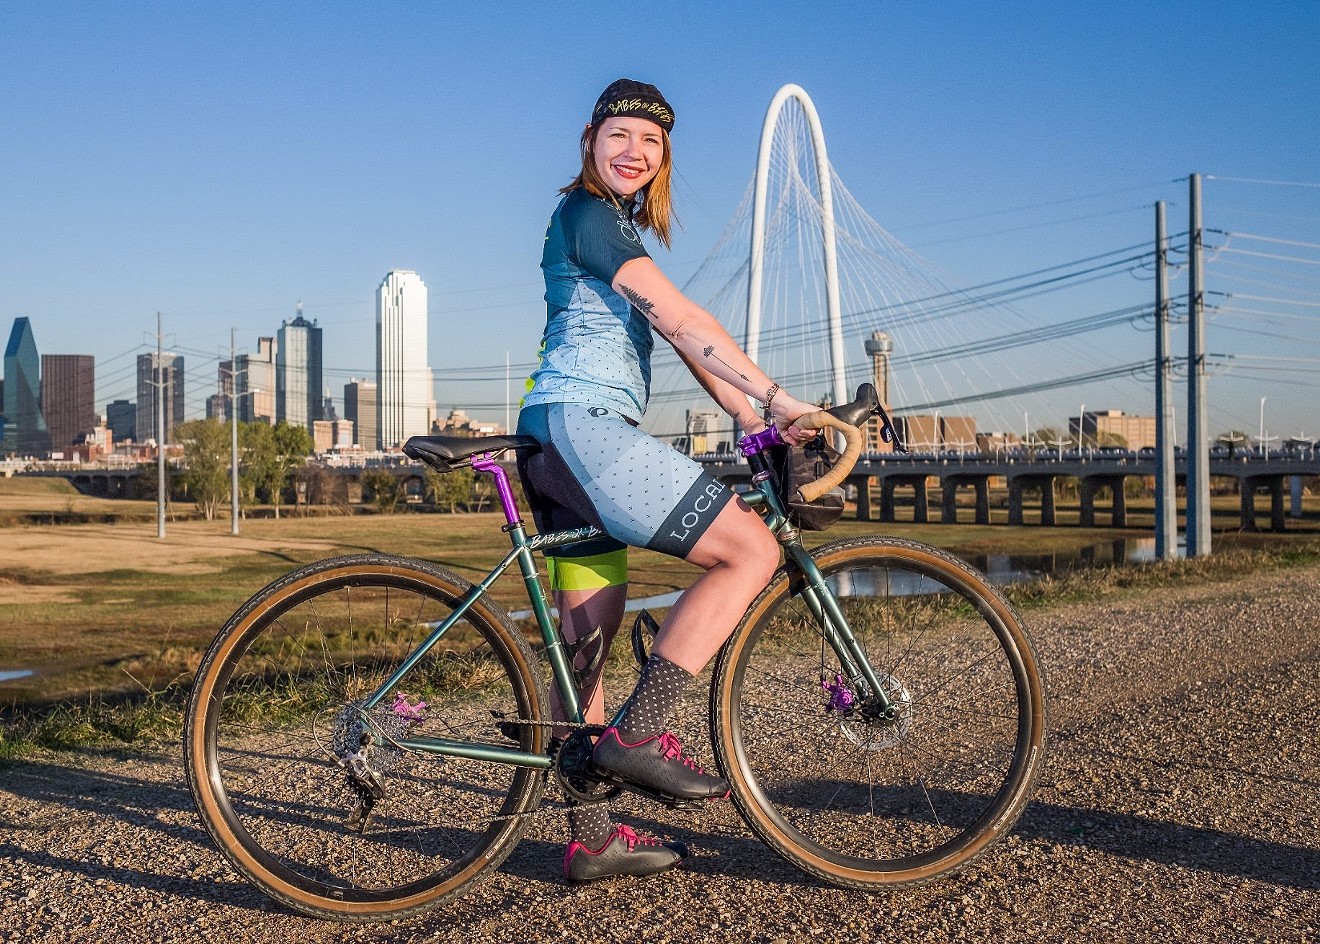 Local Hub Bicycle Company owner Kristie Holt has been providing Deep Ellum residents and visitors with a free repair station for years.